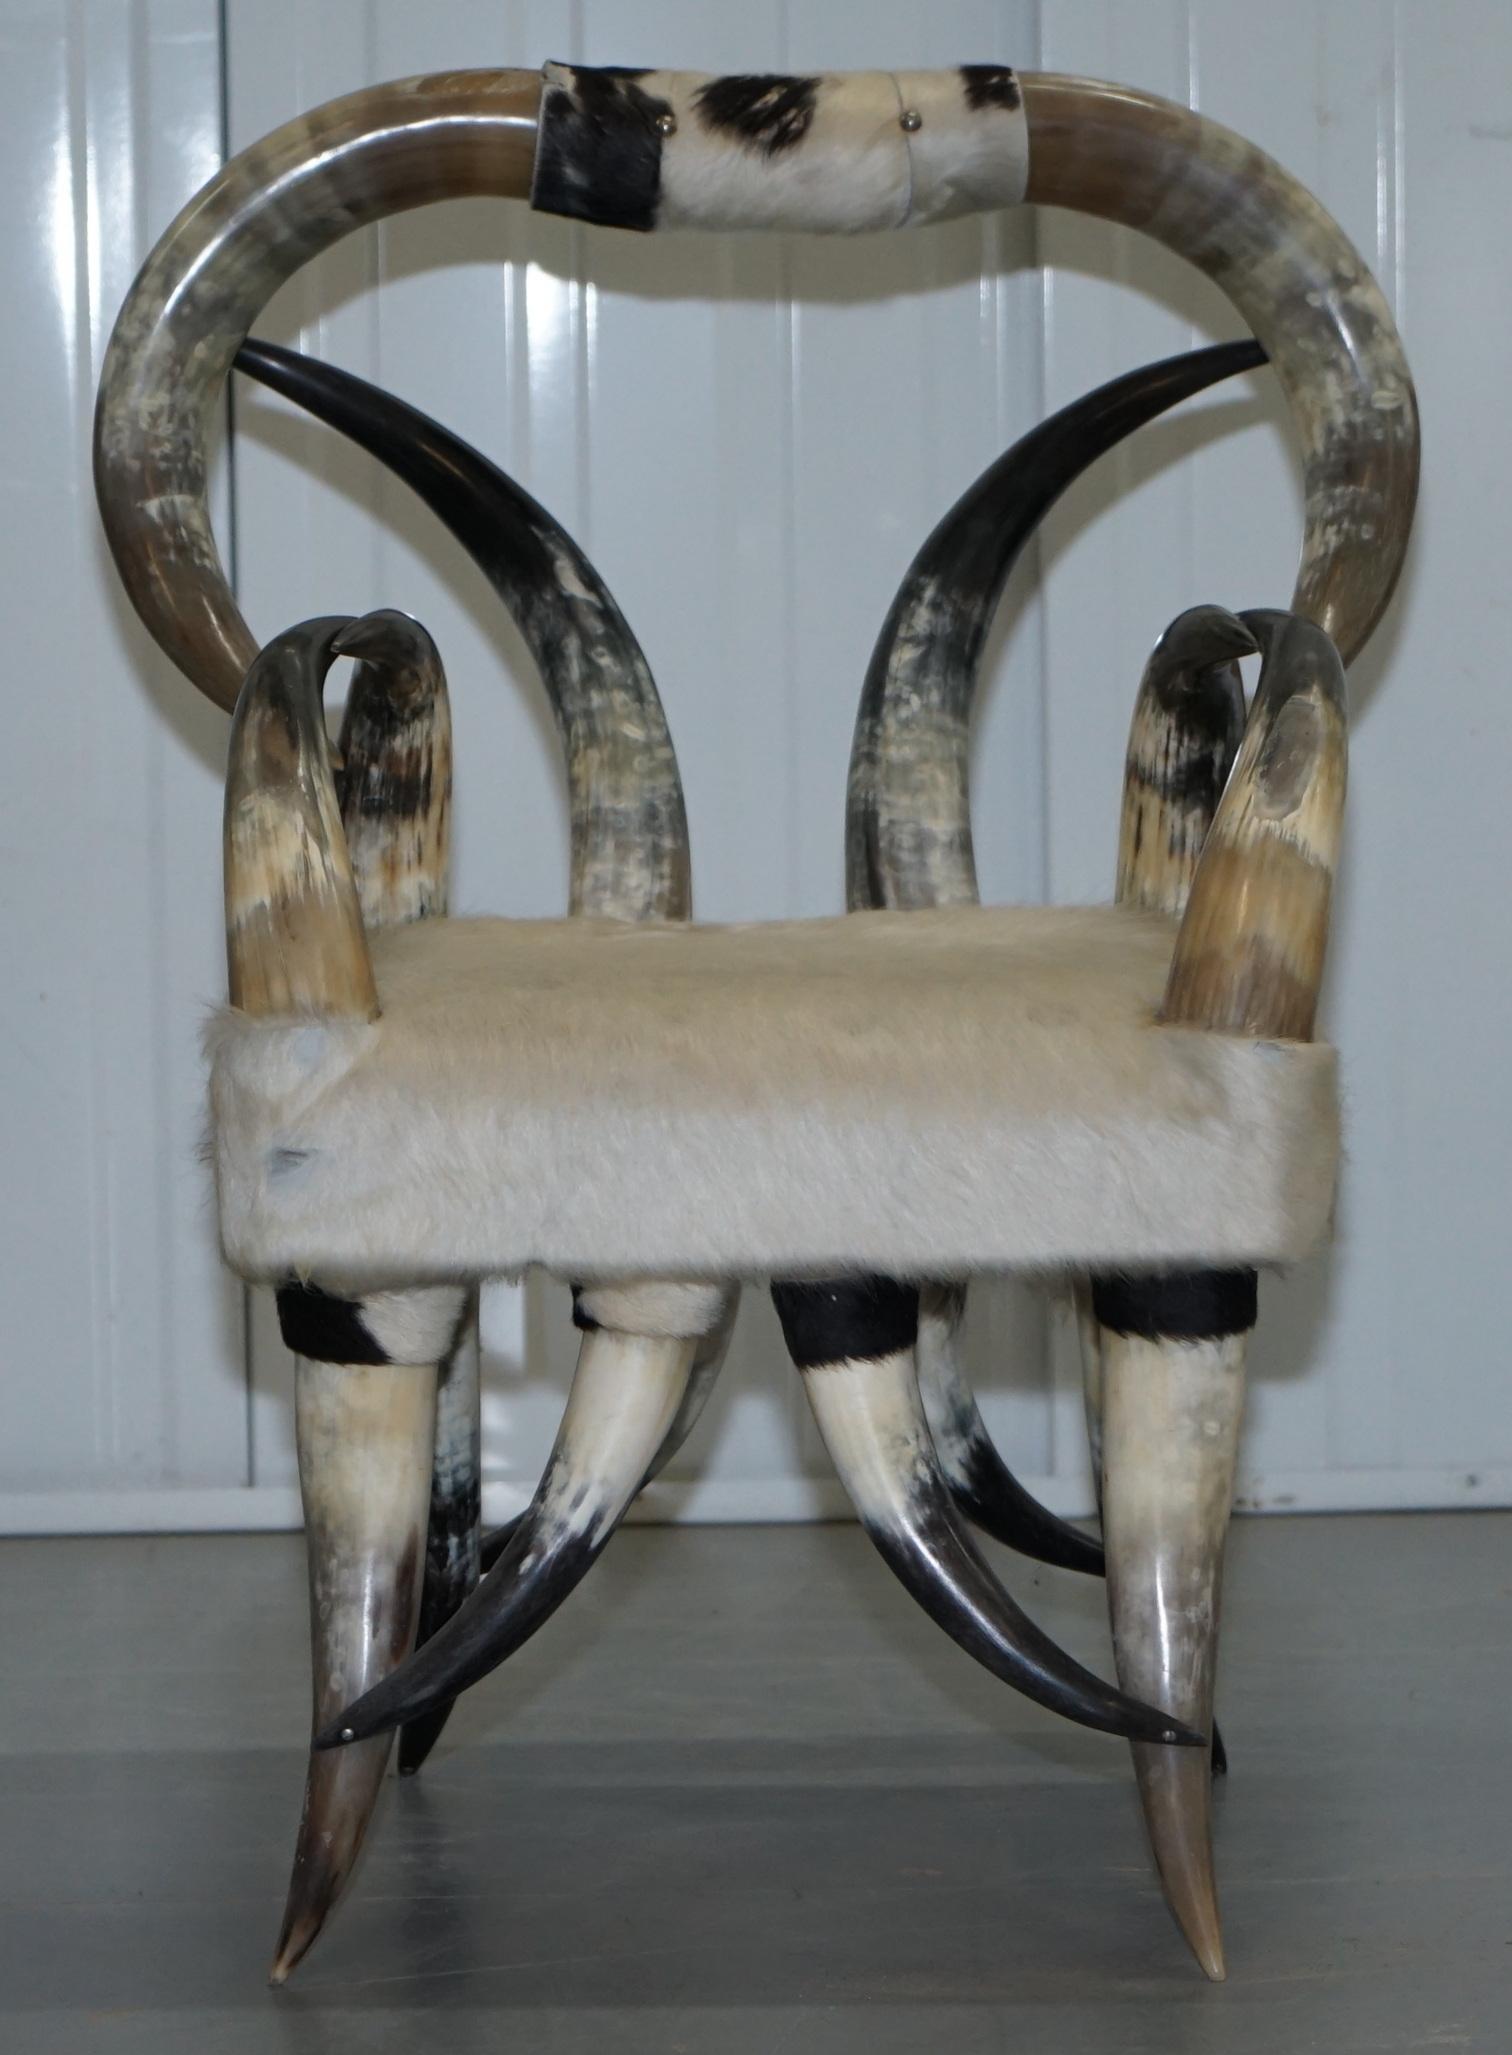 We are delighted to offer for sale this very rare nicely sized Steer or Long Horn armchair with leather upholstery

A very decorative and well made vintage chair, as you can see it is built from a selection of steer or long horns, the seat base is